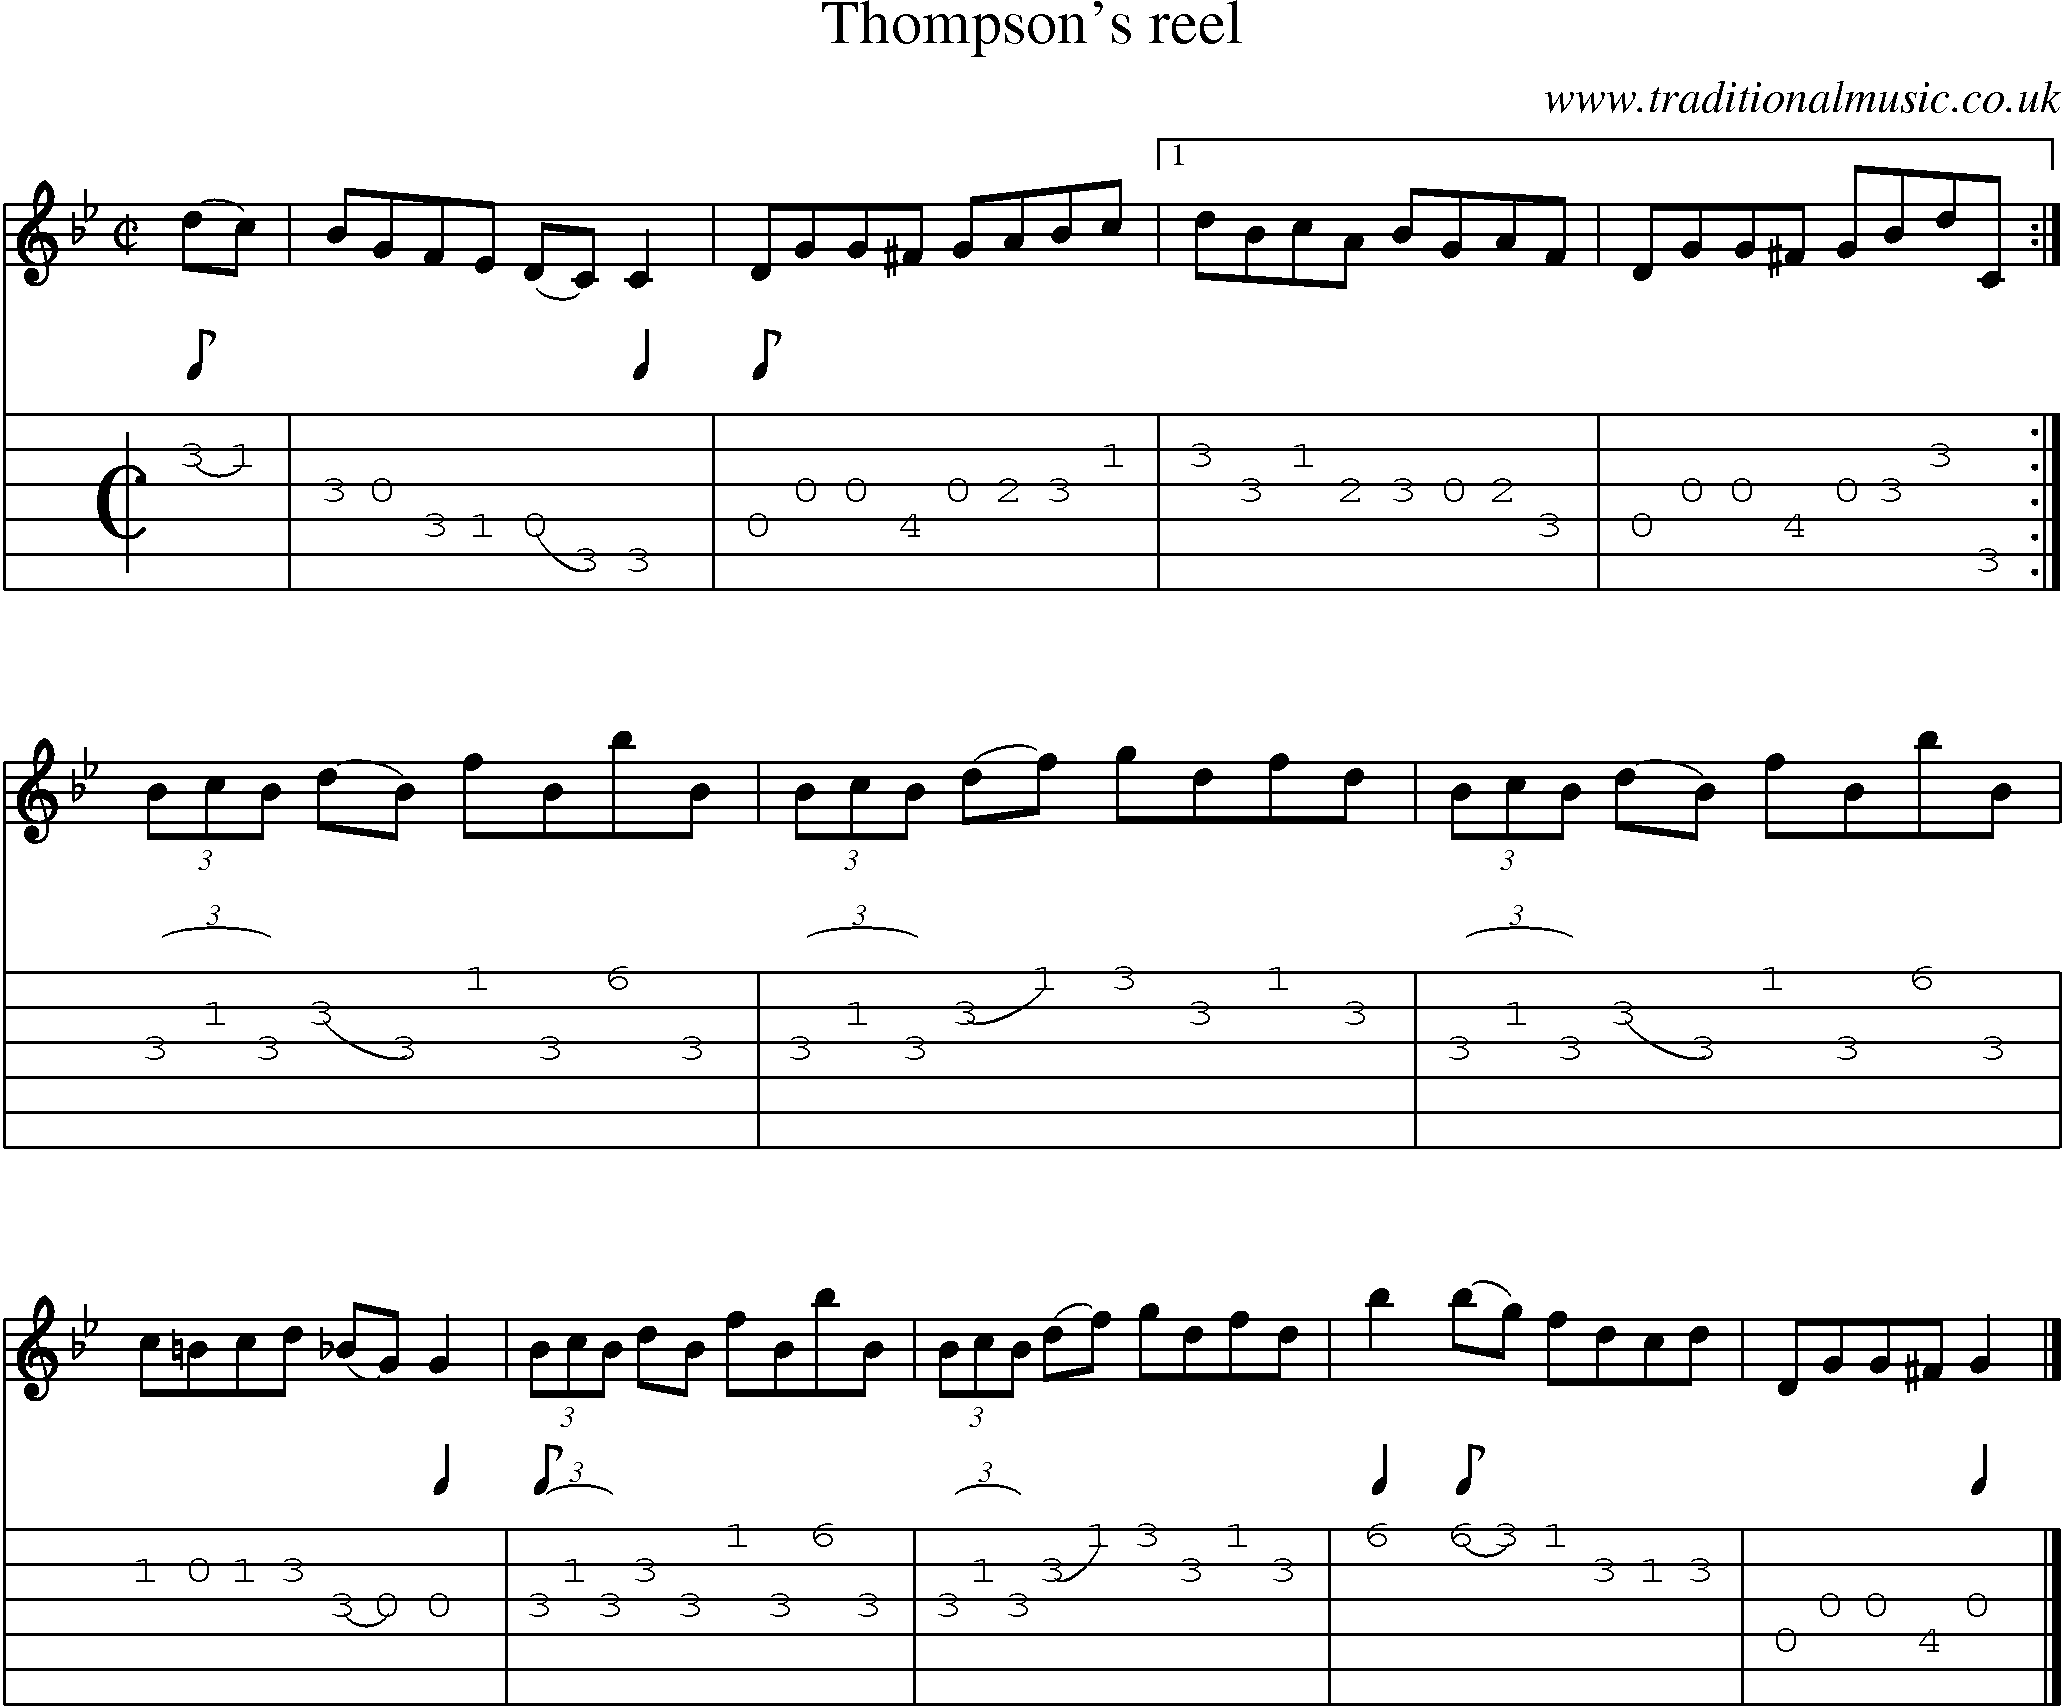 Music Score and Guitar Tabs for Thompsons Reel